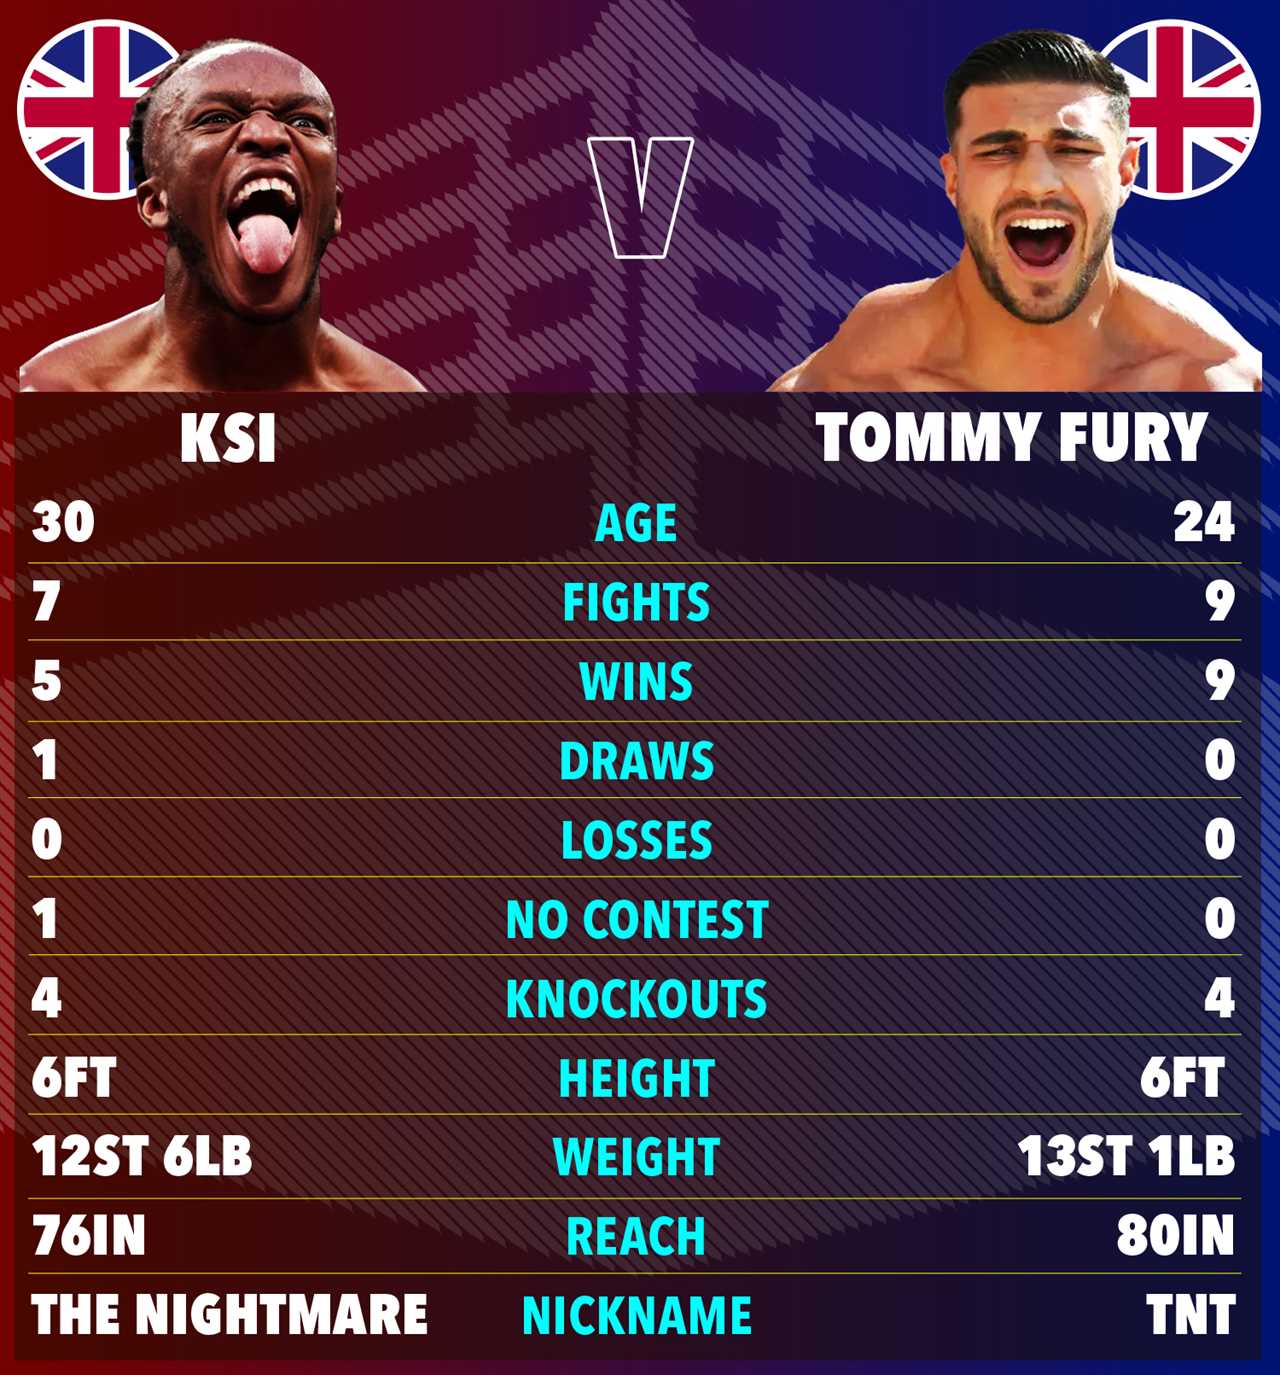 TOMMY FURY AND HIS DAD JOHN JOIN KSI FOR TOPLESS Physique COMPARISON Ahead Of Epic Fight